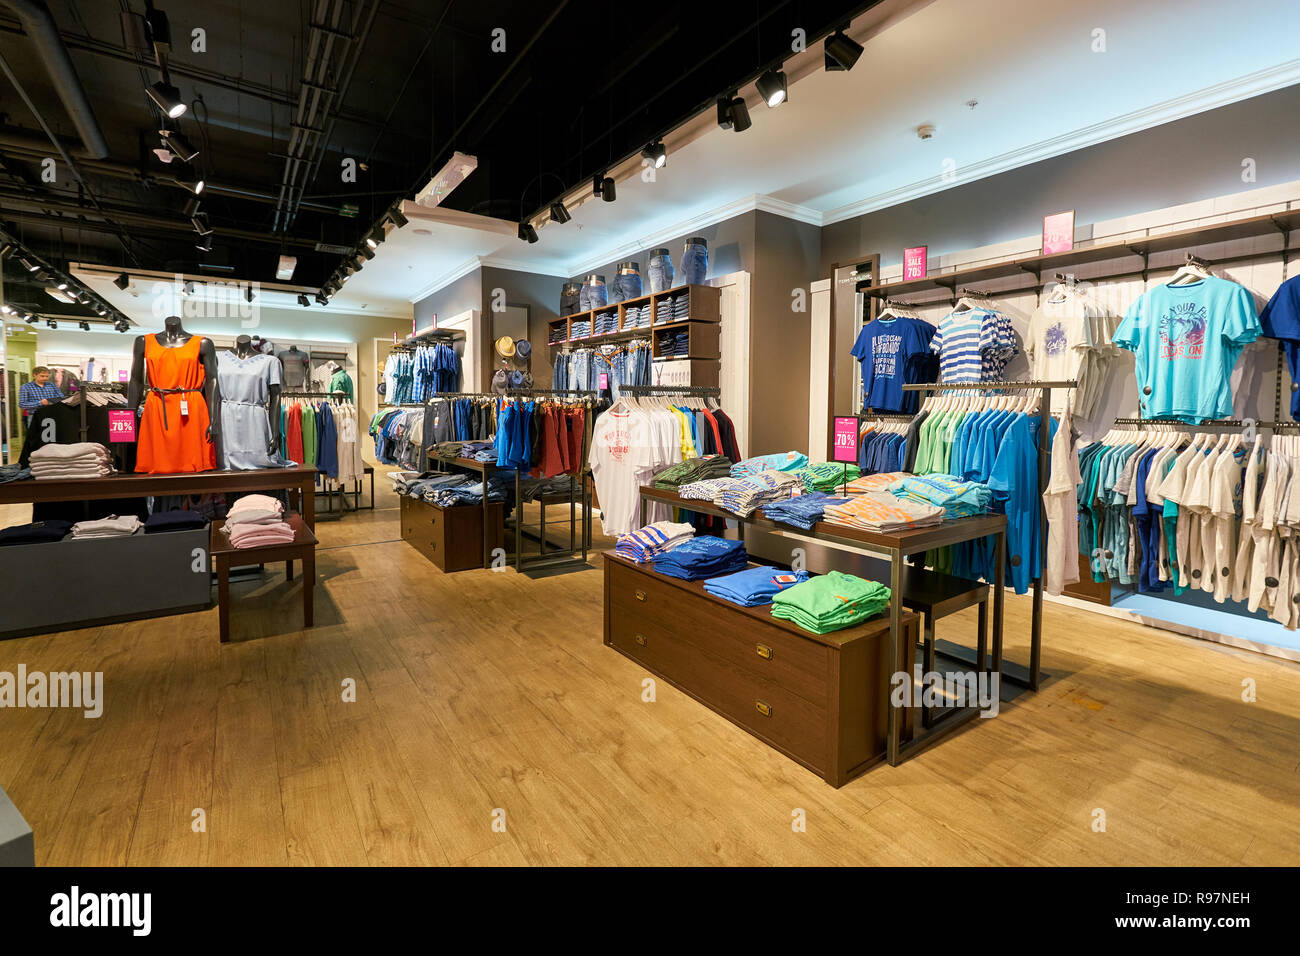 SAINT PETERSBURG, RUSSIA - CIRCA AUGUST, 2017: inside Tom Tailor store at  Galeria shopping center. Tom Tailor is a German lifestyle clothing company  Stock Photo - Alamy